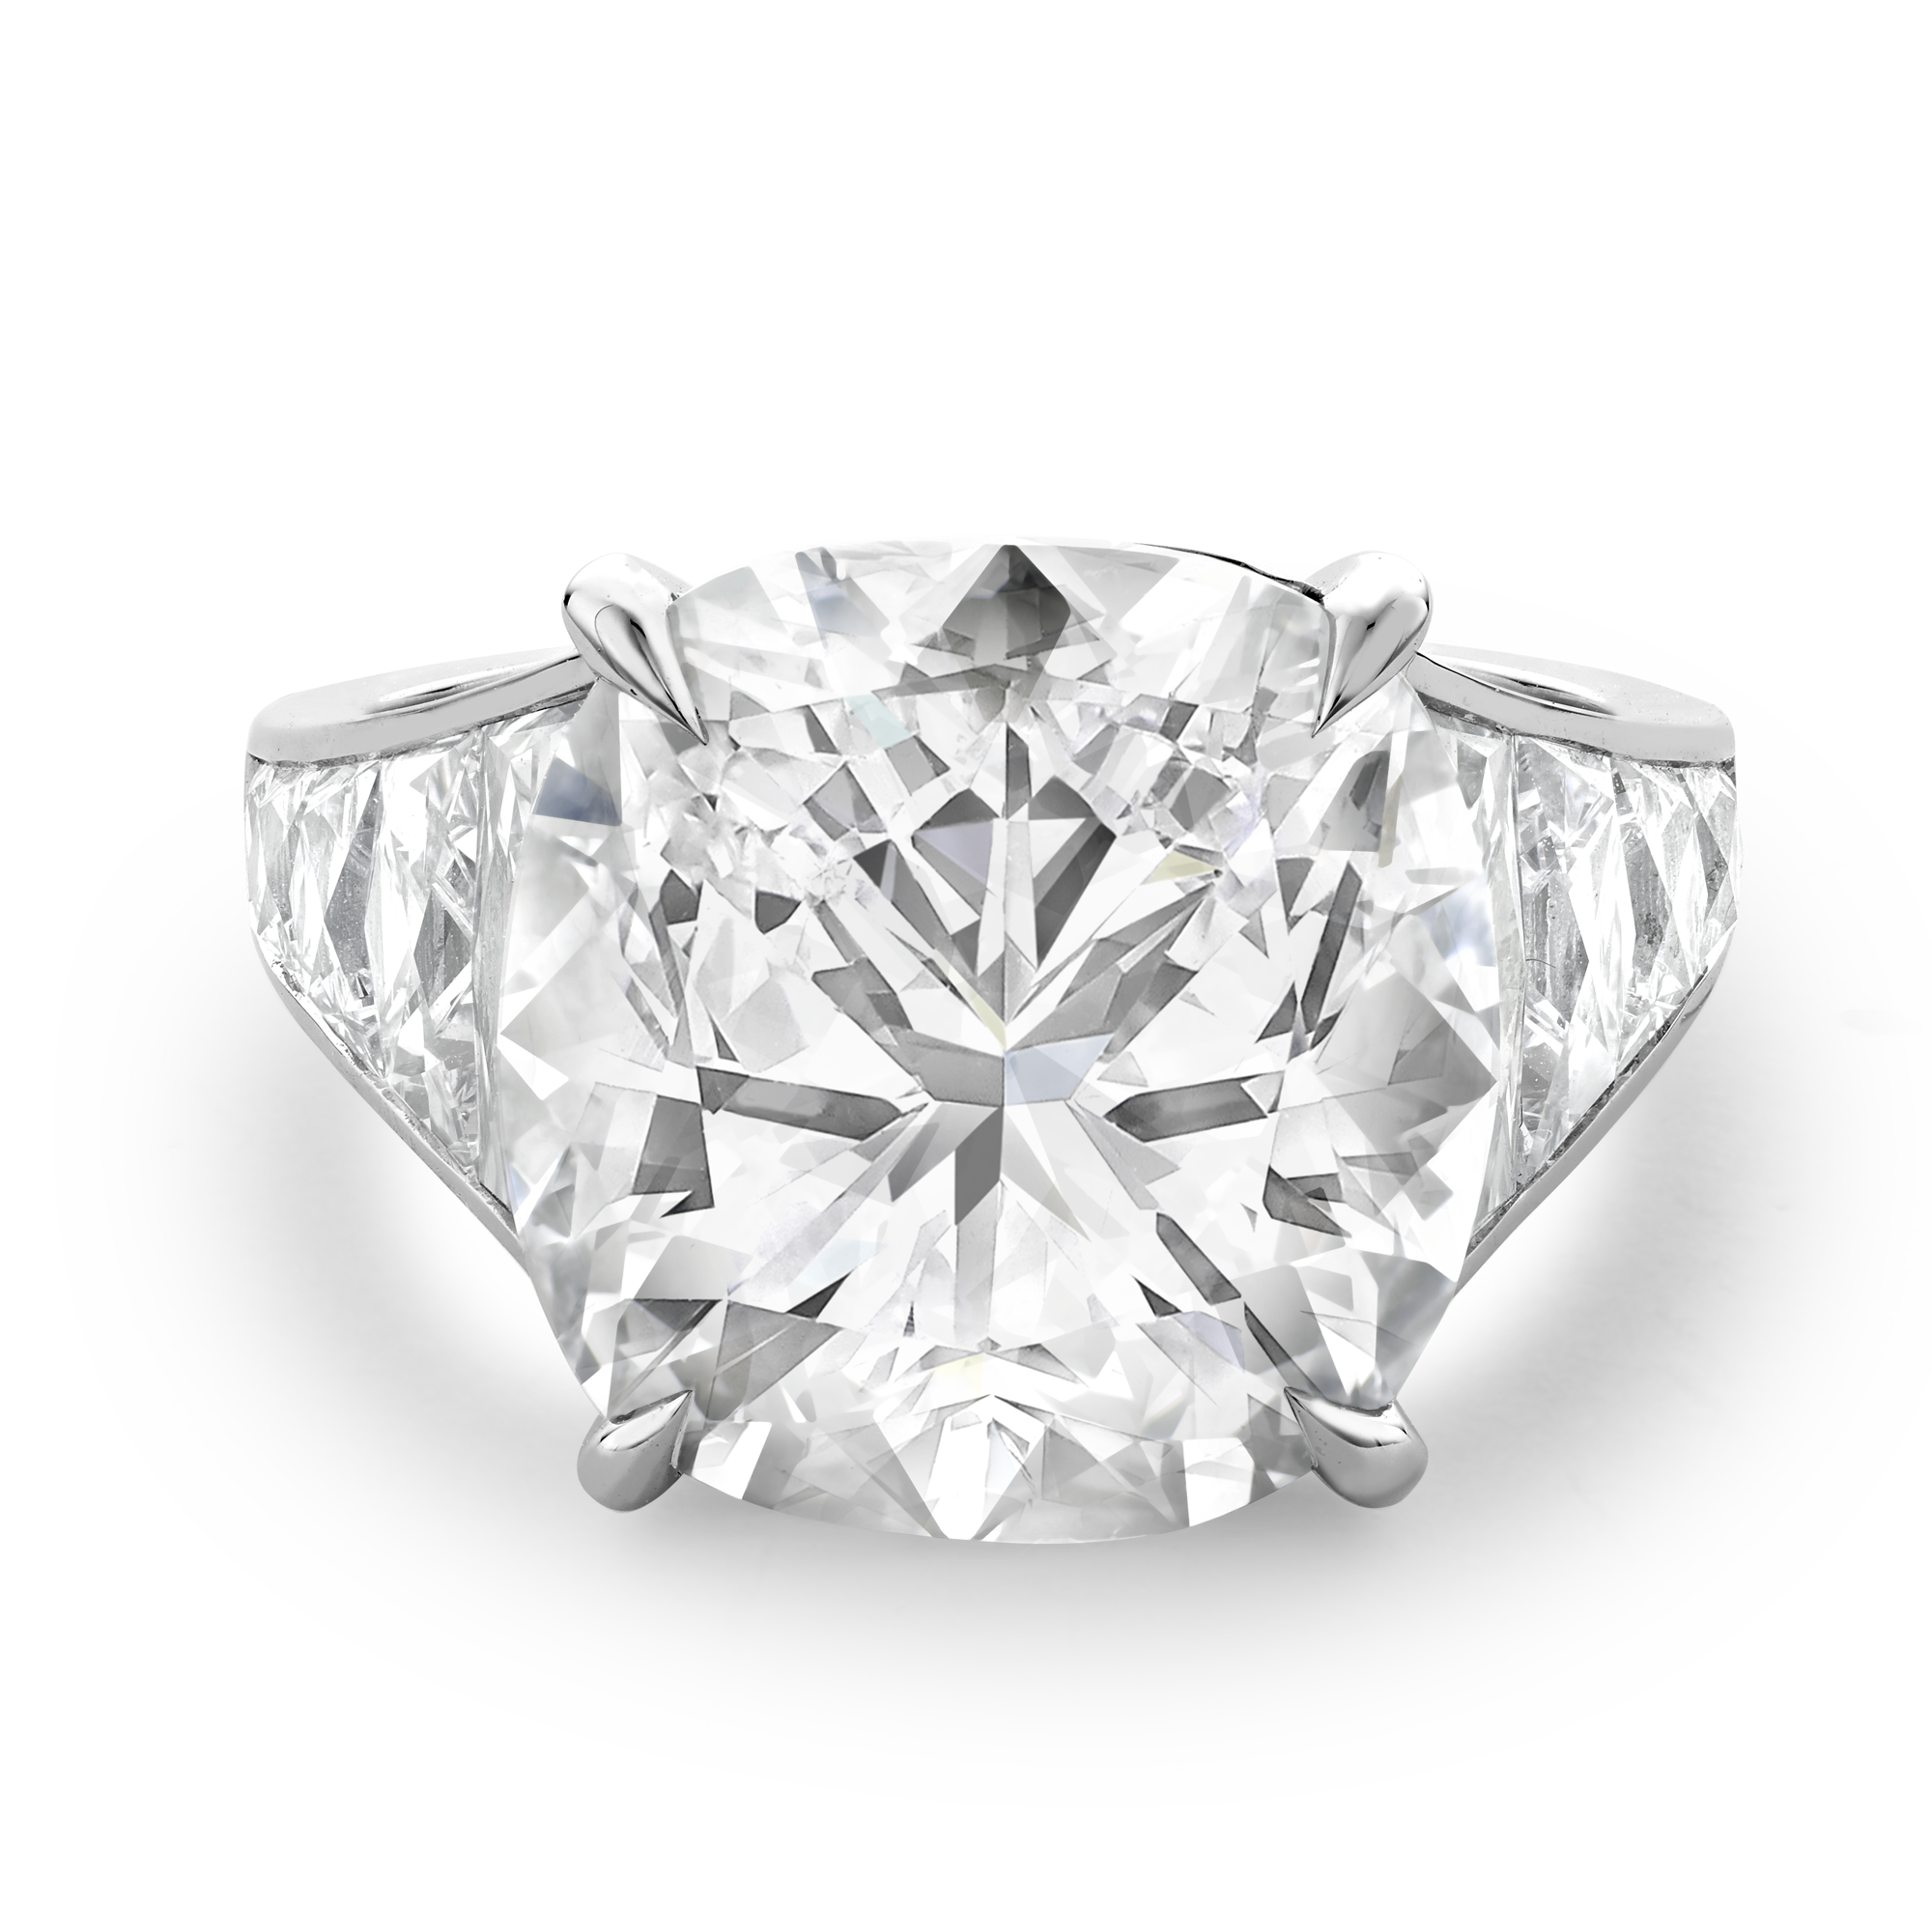 Masterpiece Pragnell Setting Diamond Ring with Tapered French Cut Diamond Shoulders Antique Cushion Cut, Four Claw Set, GIA Certified_2